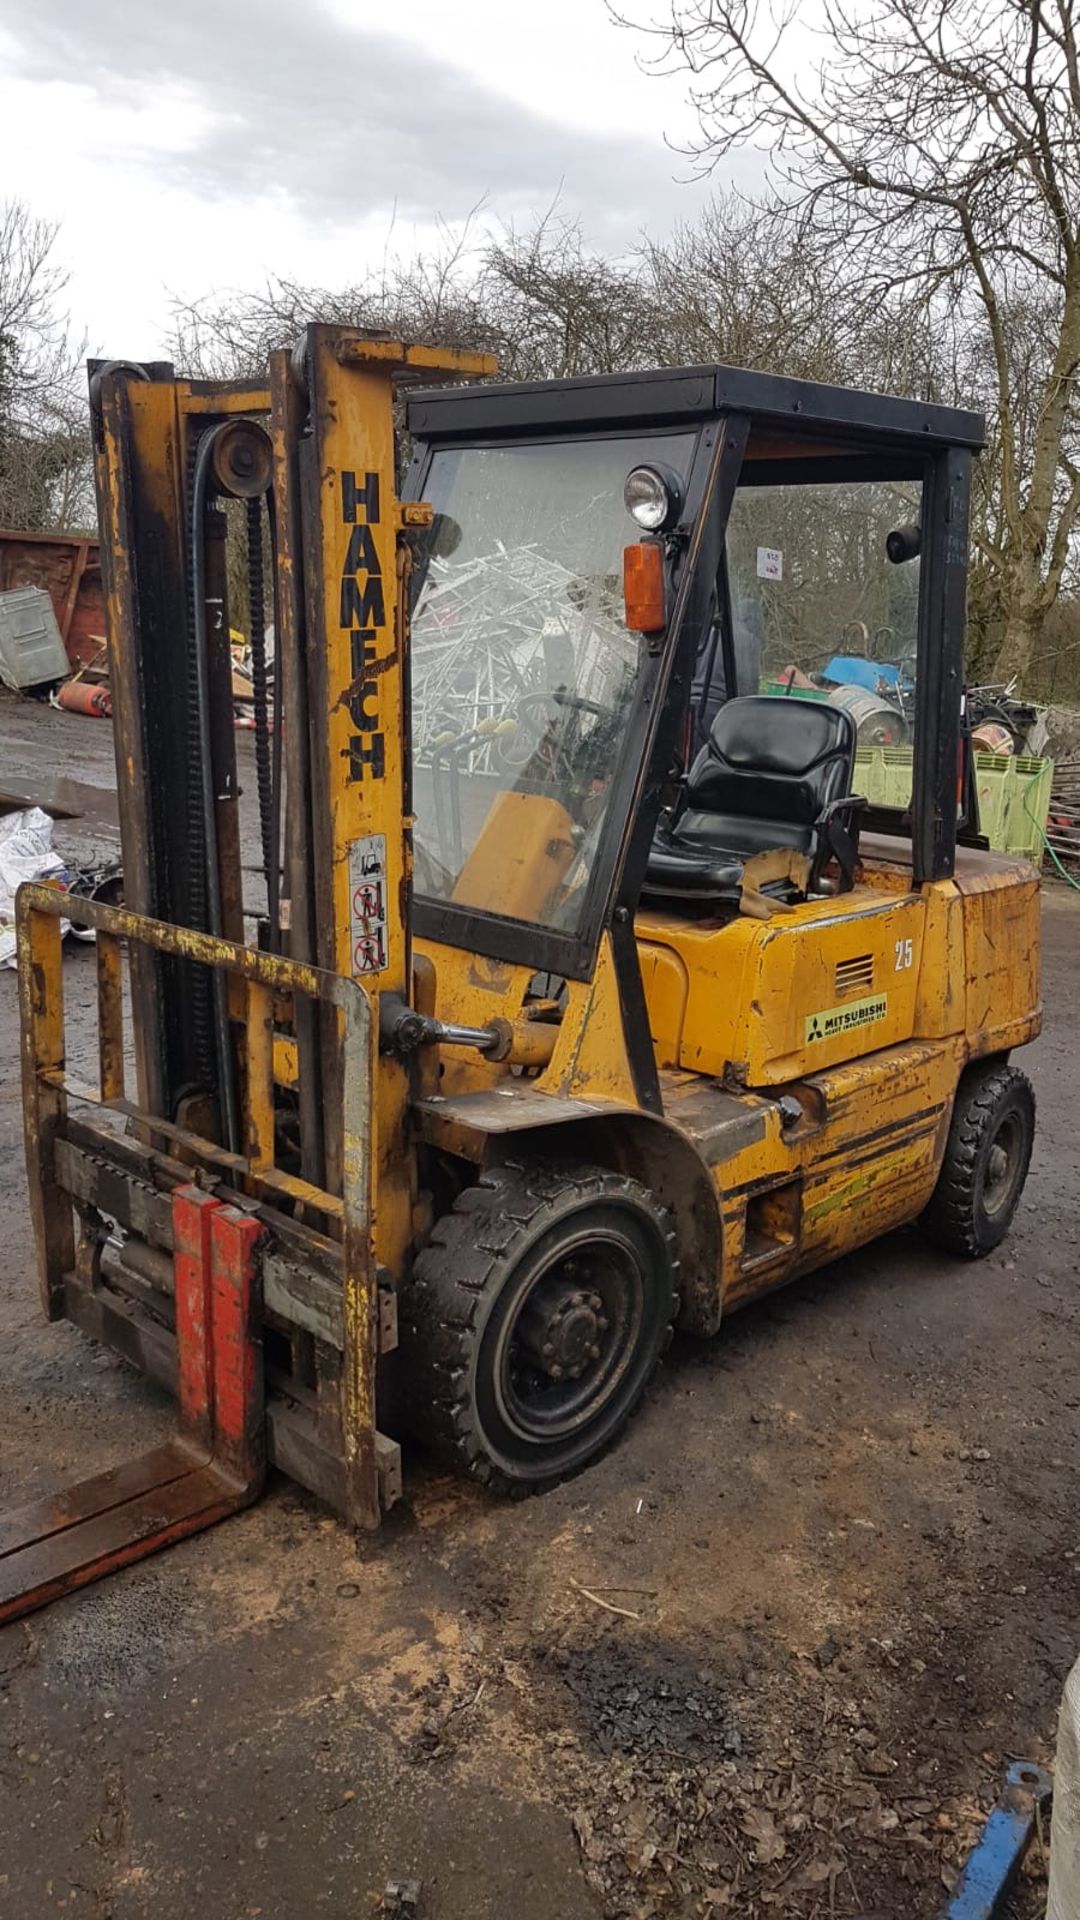 MITSUBISHI FD25 DIESEL POWERED FORKLIFT TRUCK, WITH SIDE SHIFT, 2.5 TONNE RATED CAPACITY. VENDORS